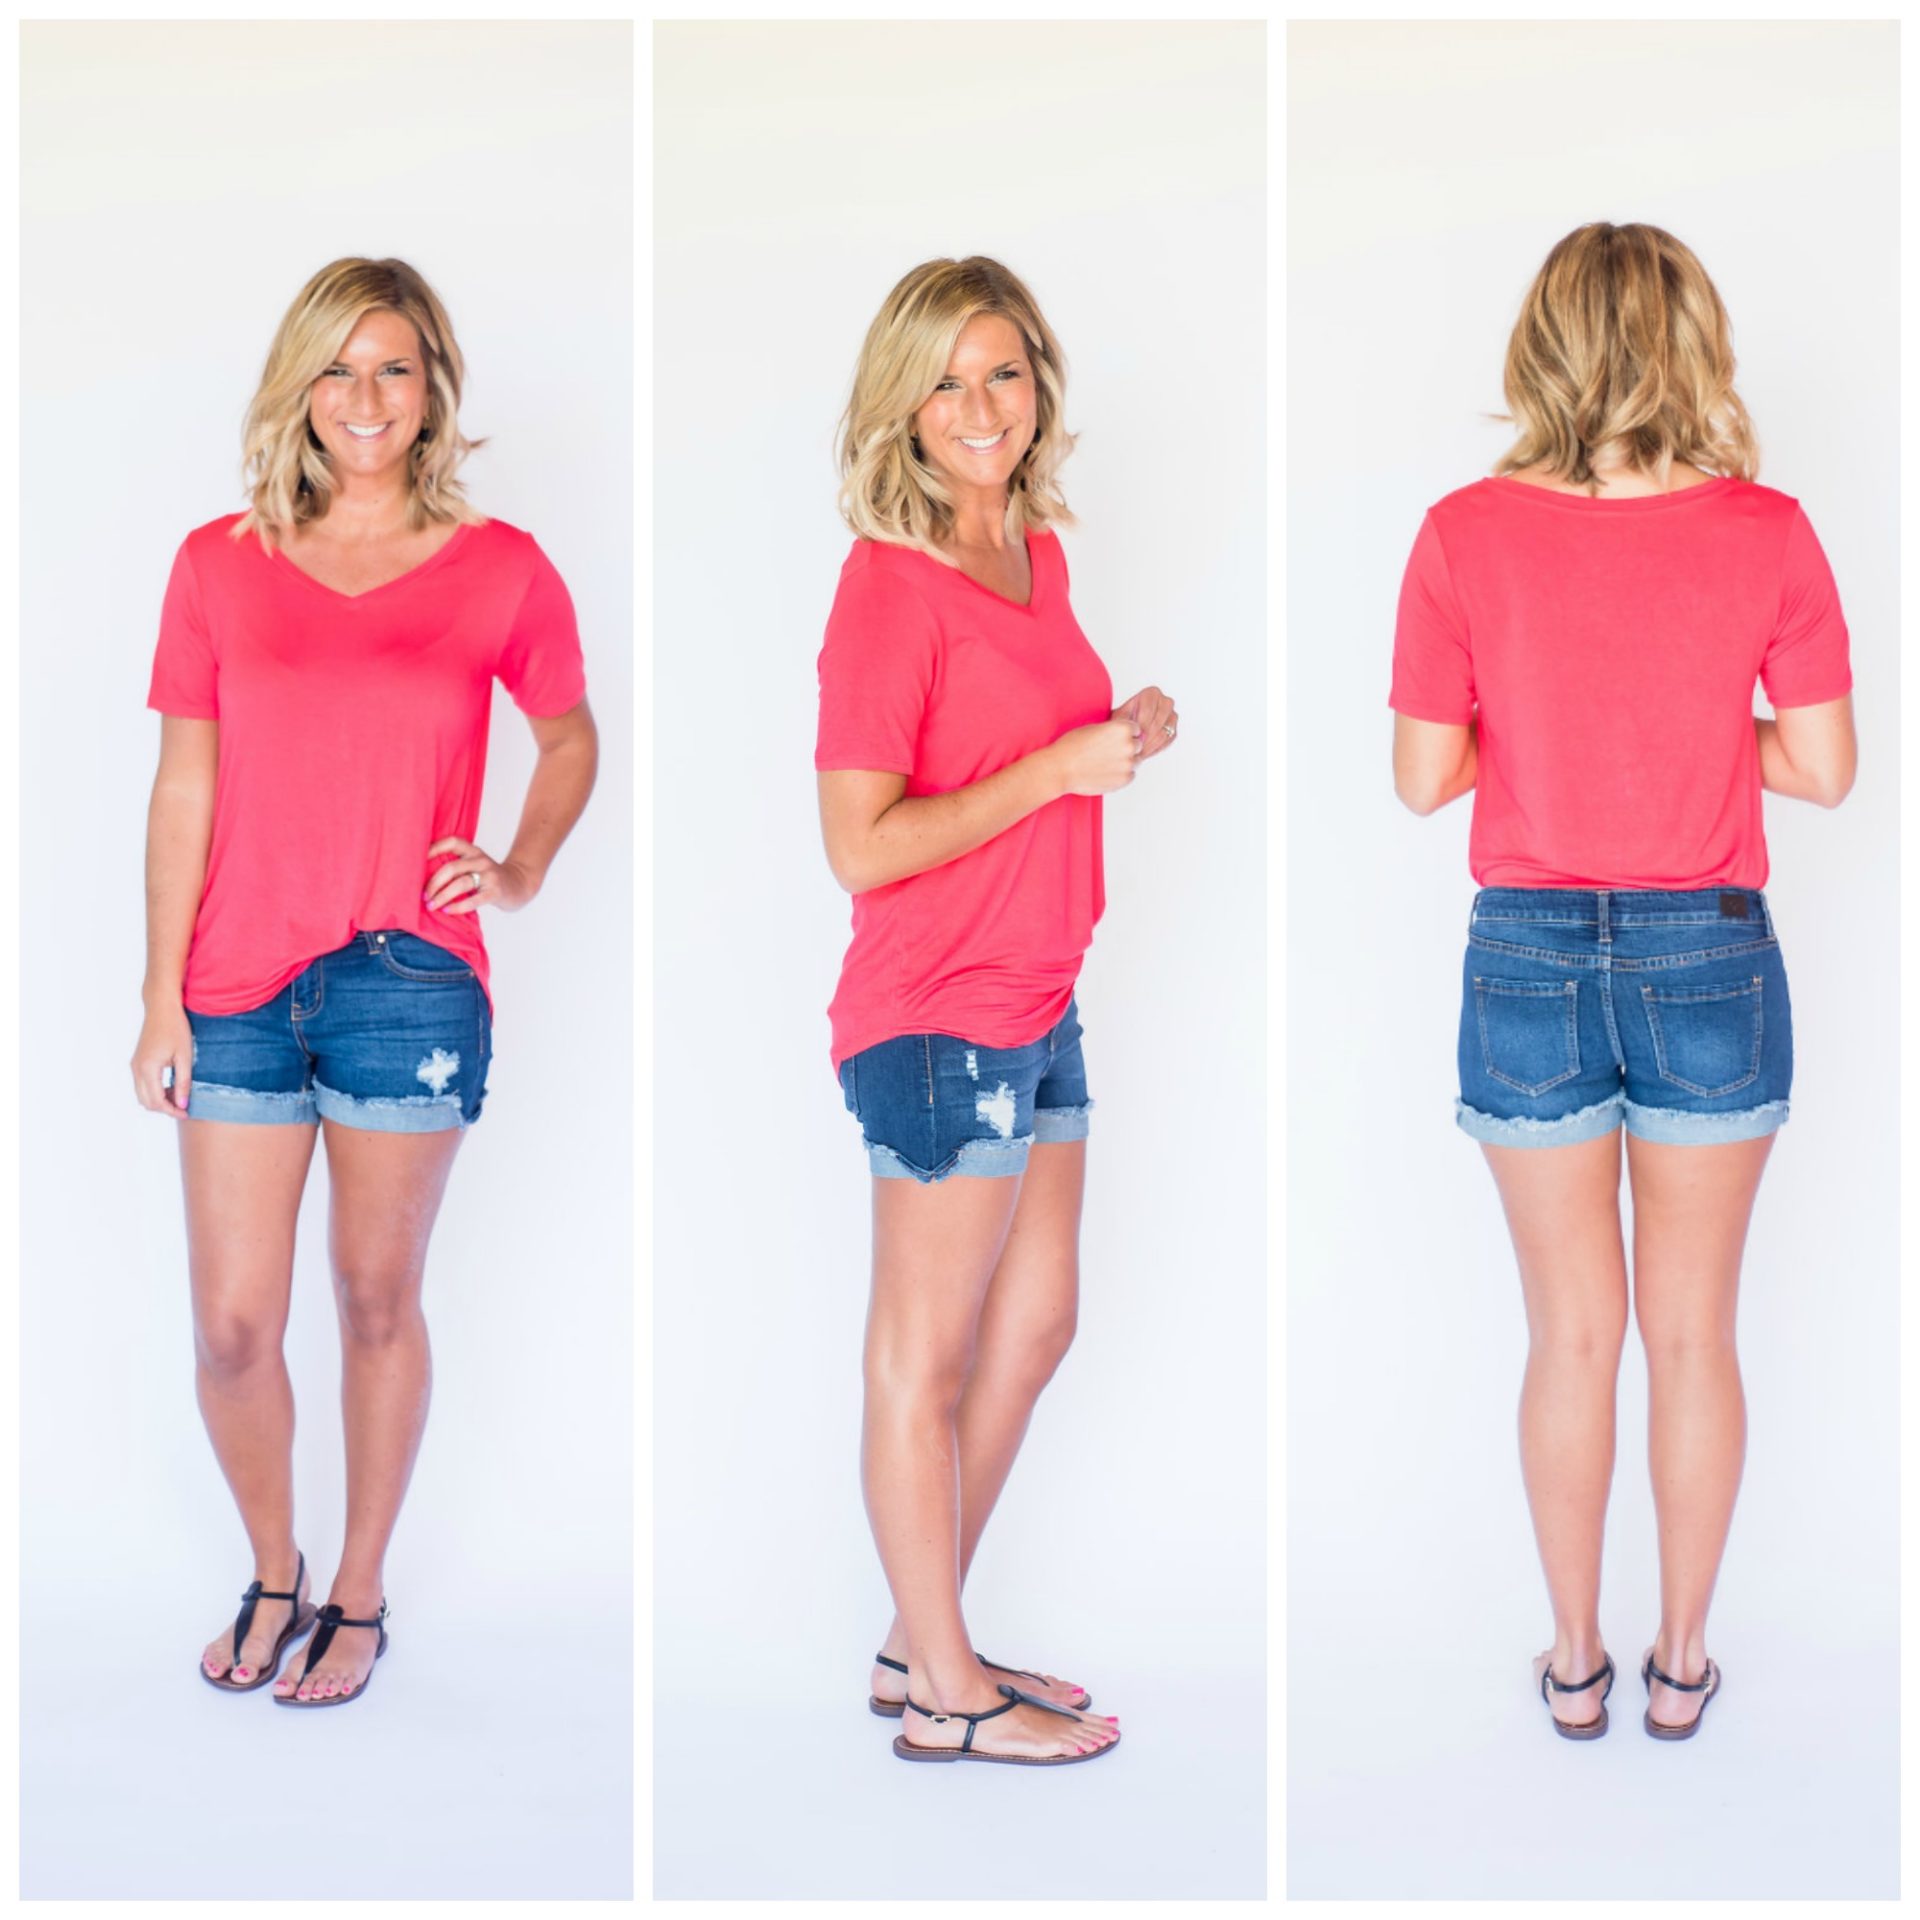 Summer Shorts // Casual and Cute Summer Outfit // Distressed Shorts // Shorts on Sale